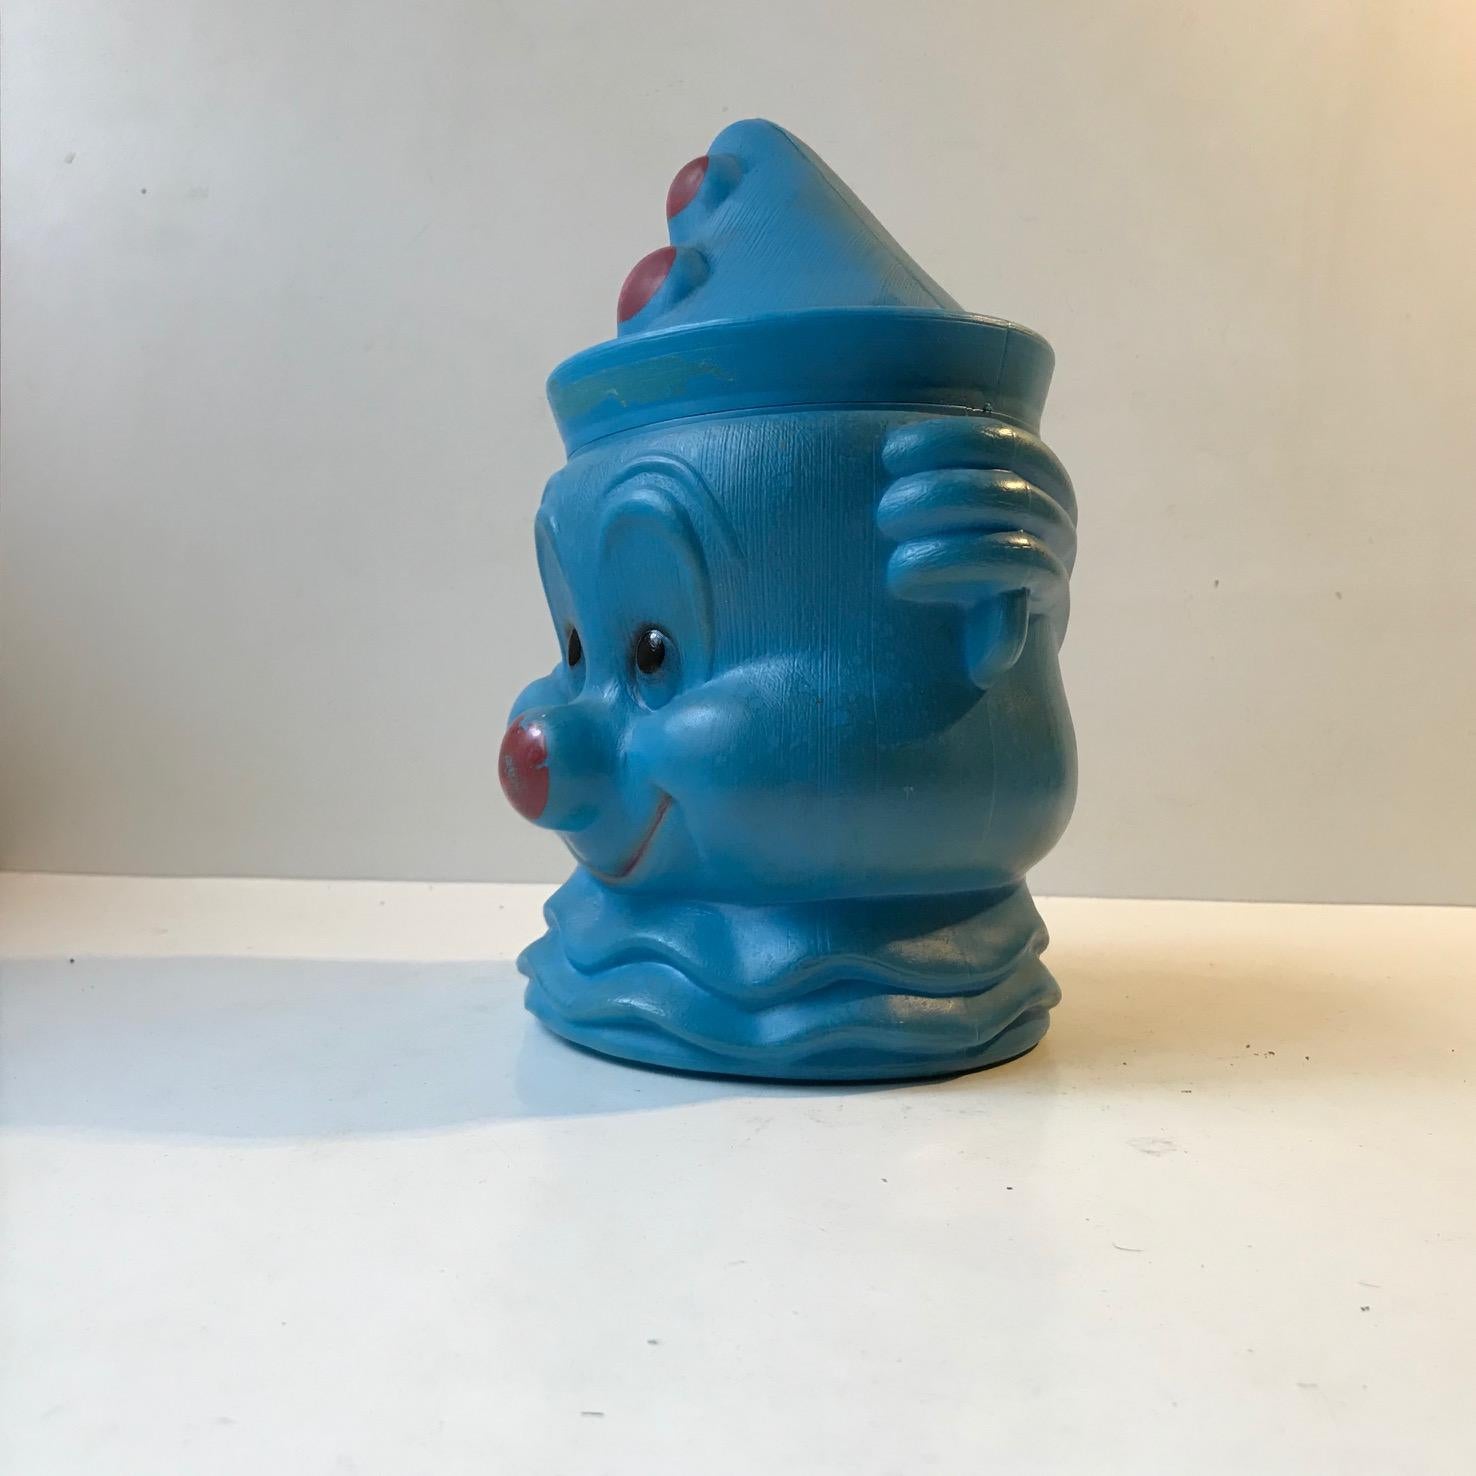 A rare survivor from late 1950s or early 60s comes this large canister in the shape of a clown bear head. It measures 25 cm in height and 17 cm in width. Originally made as a toy beach/sand toy. It was manufactured by SPS in USA and sold only in the